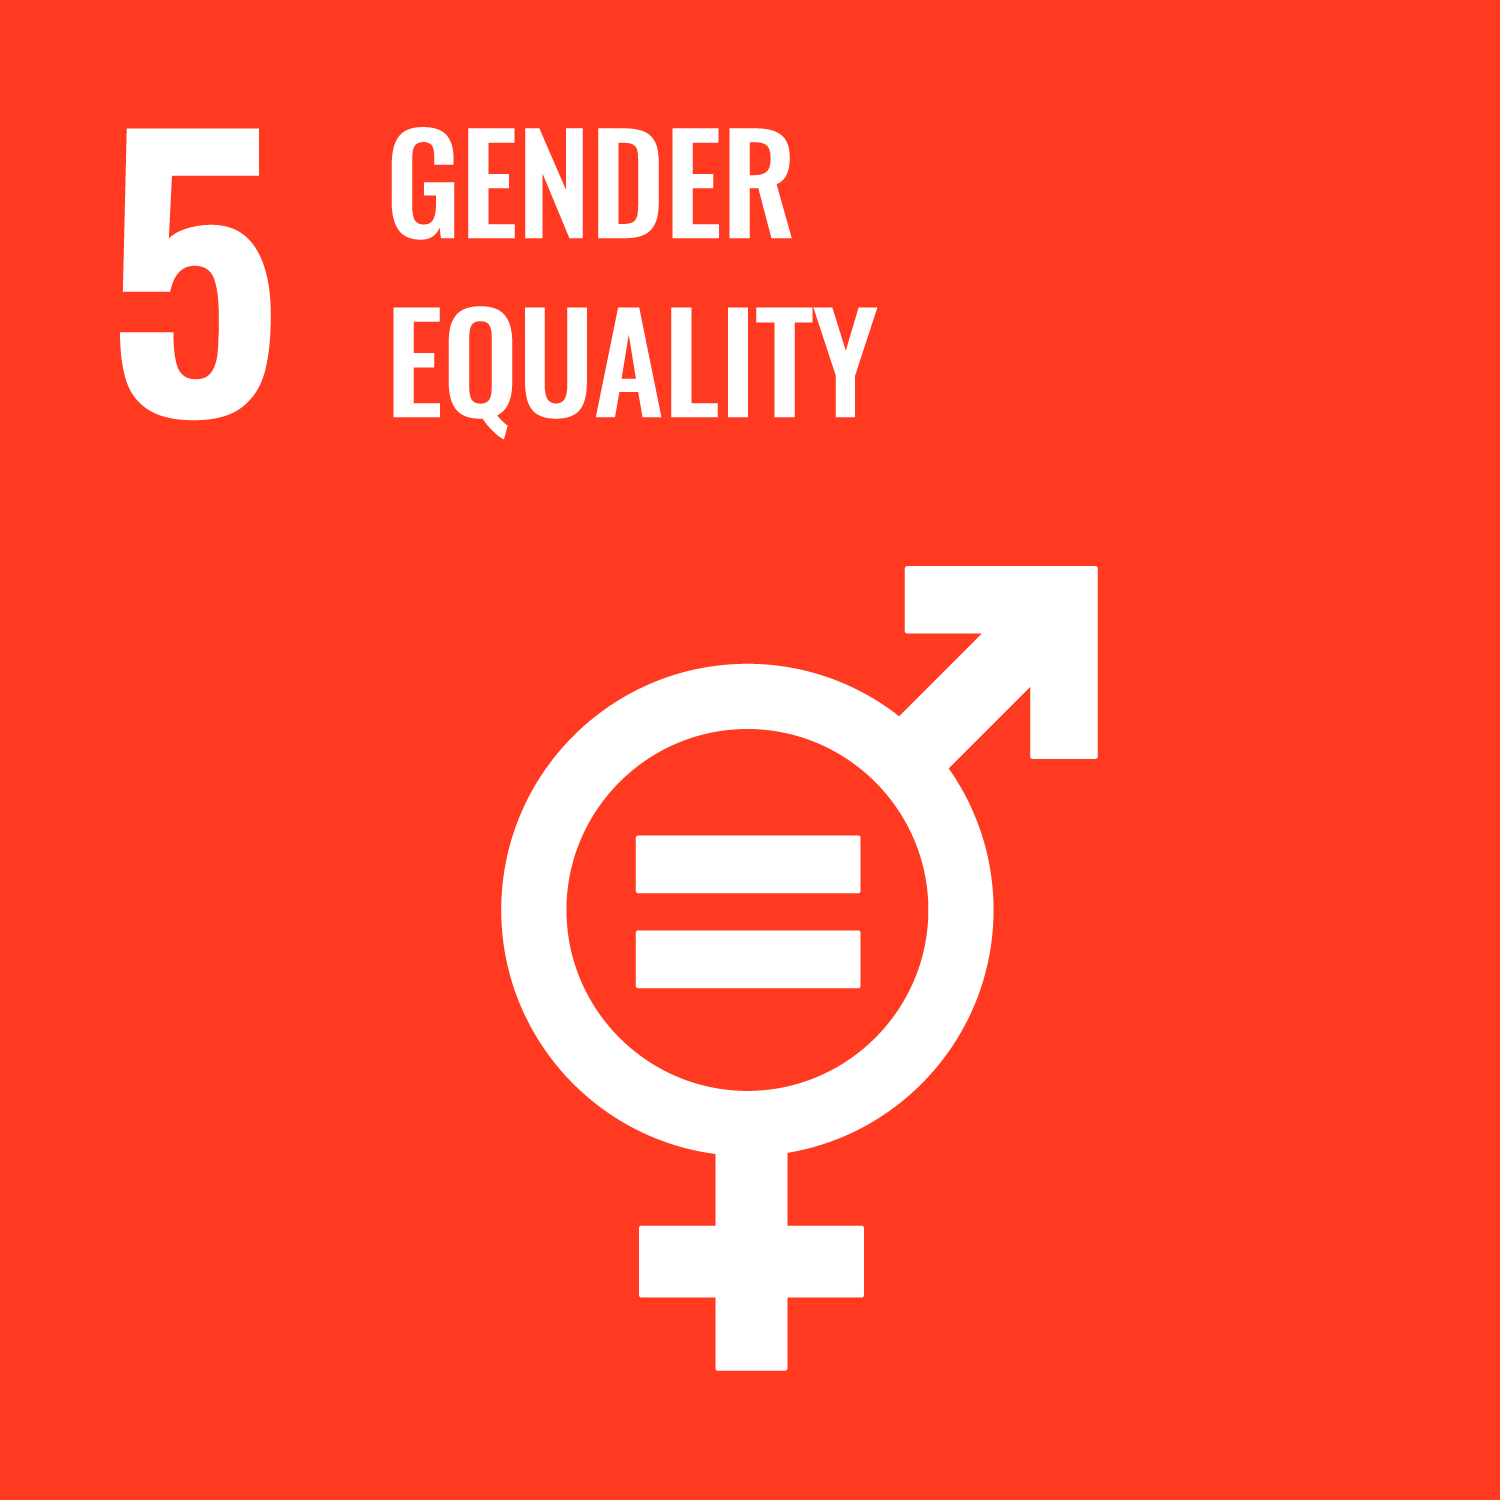 the phrase 5 gender equality in white on a red background